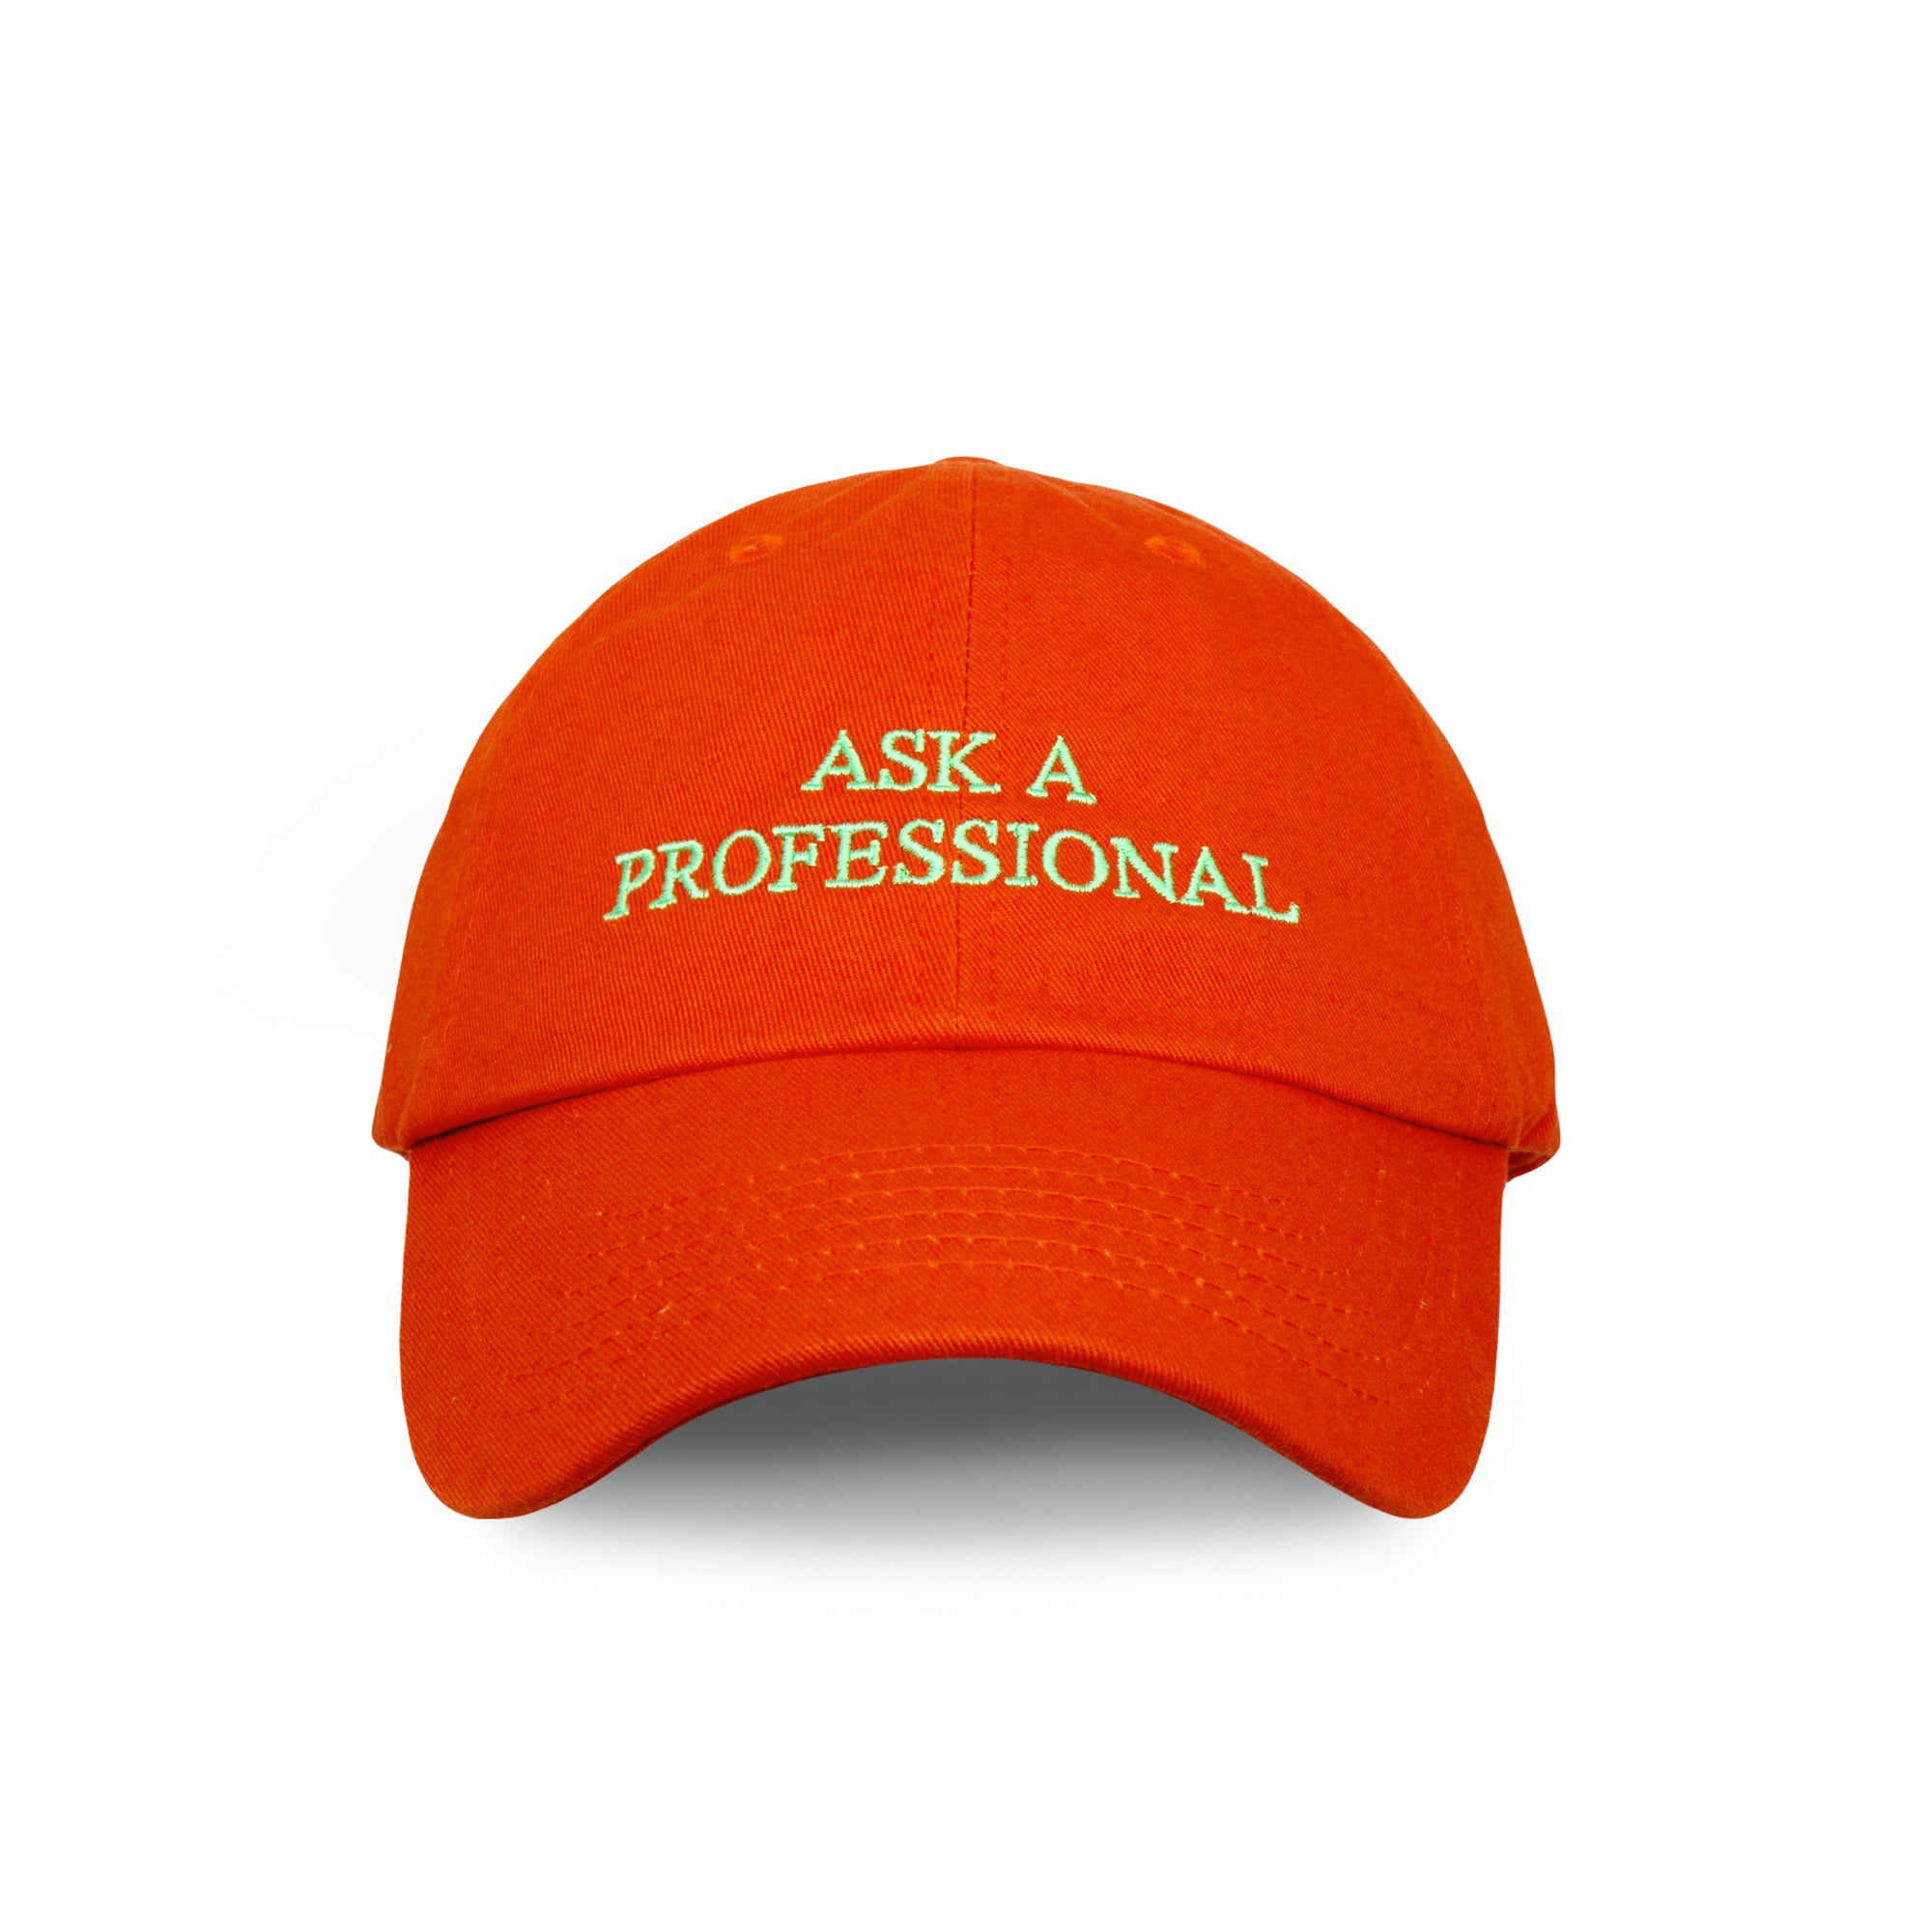 ASK A PROFESSIONAL